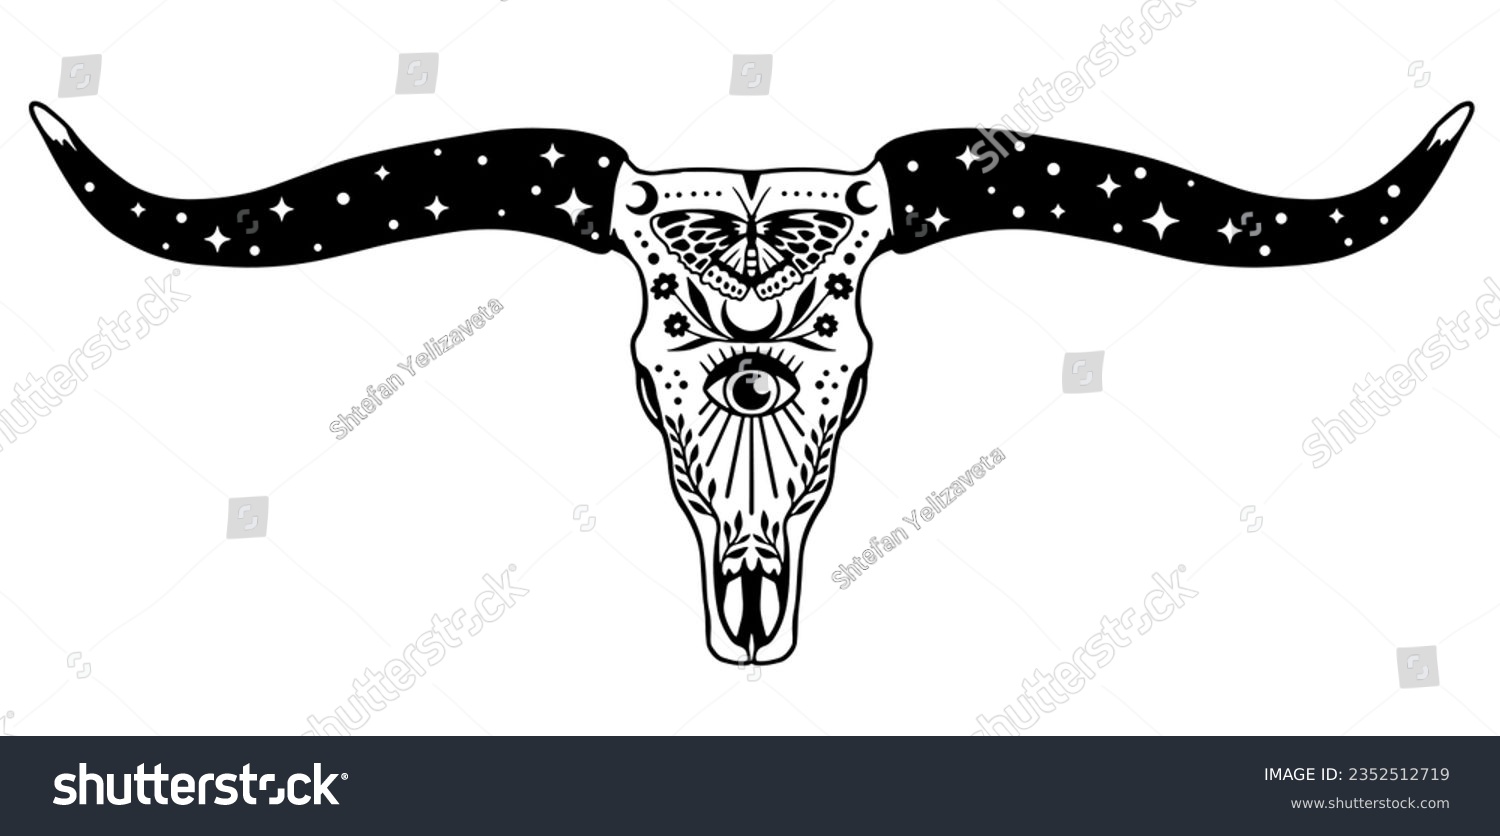 SVG of Texas Longhorn, Country Western boho magic Bull Cattle Vintage Label Logo Design. Vector hand drawing of the head of a bull skull on a white background. svg